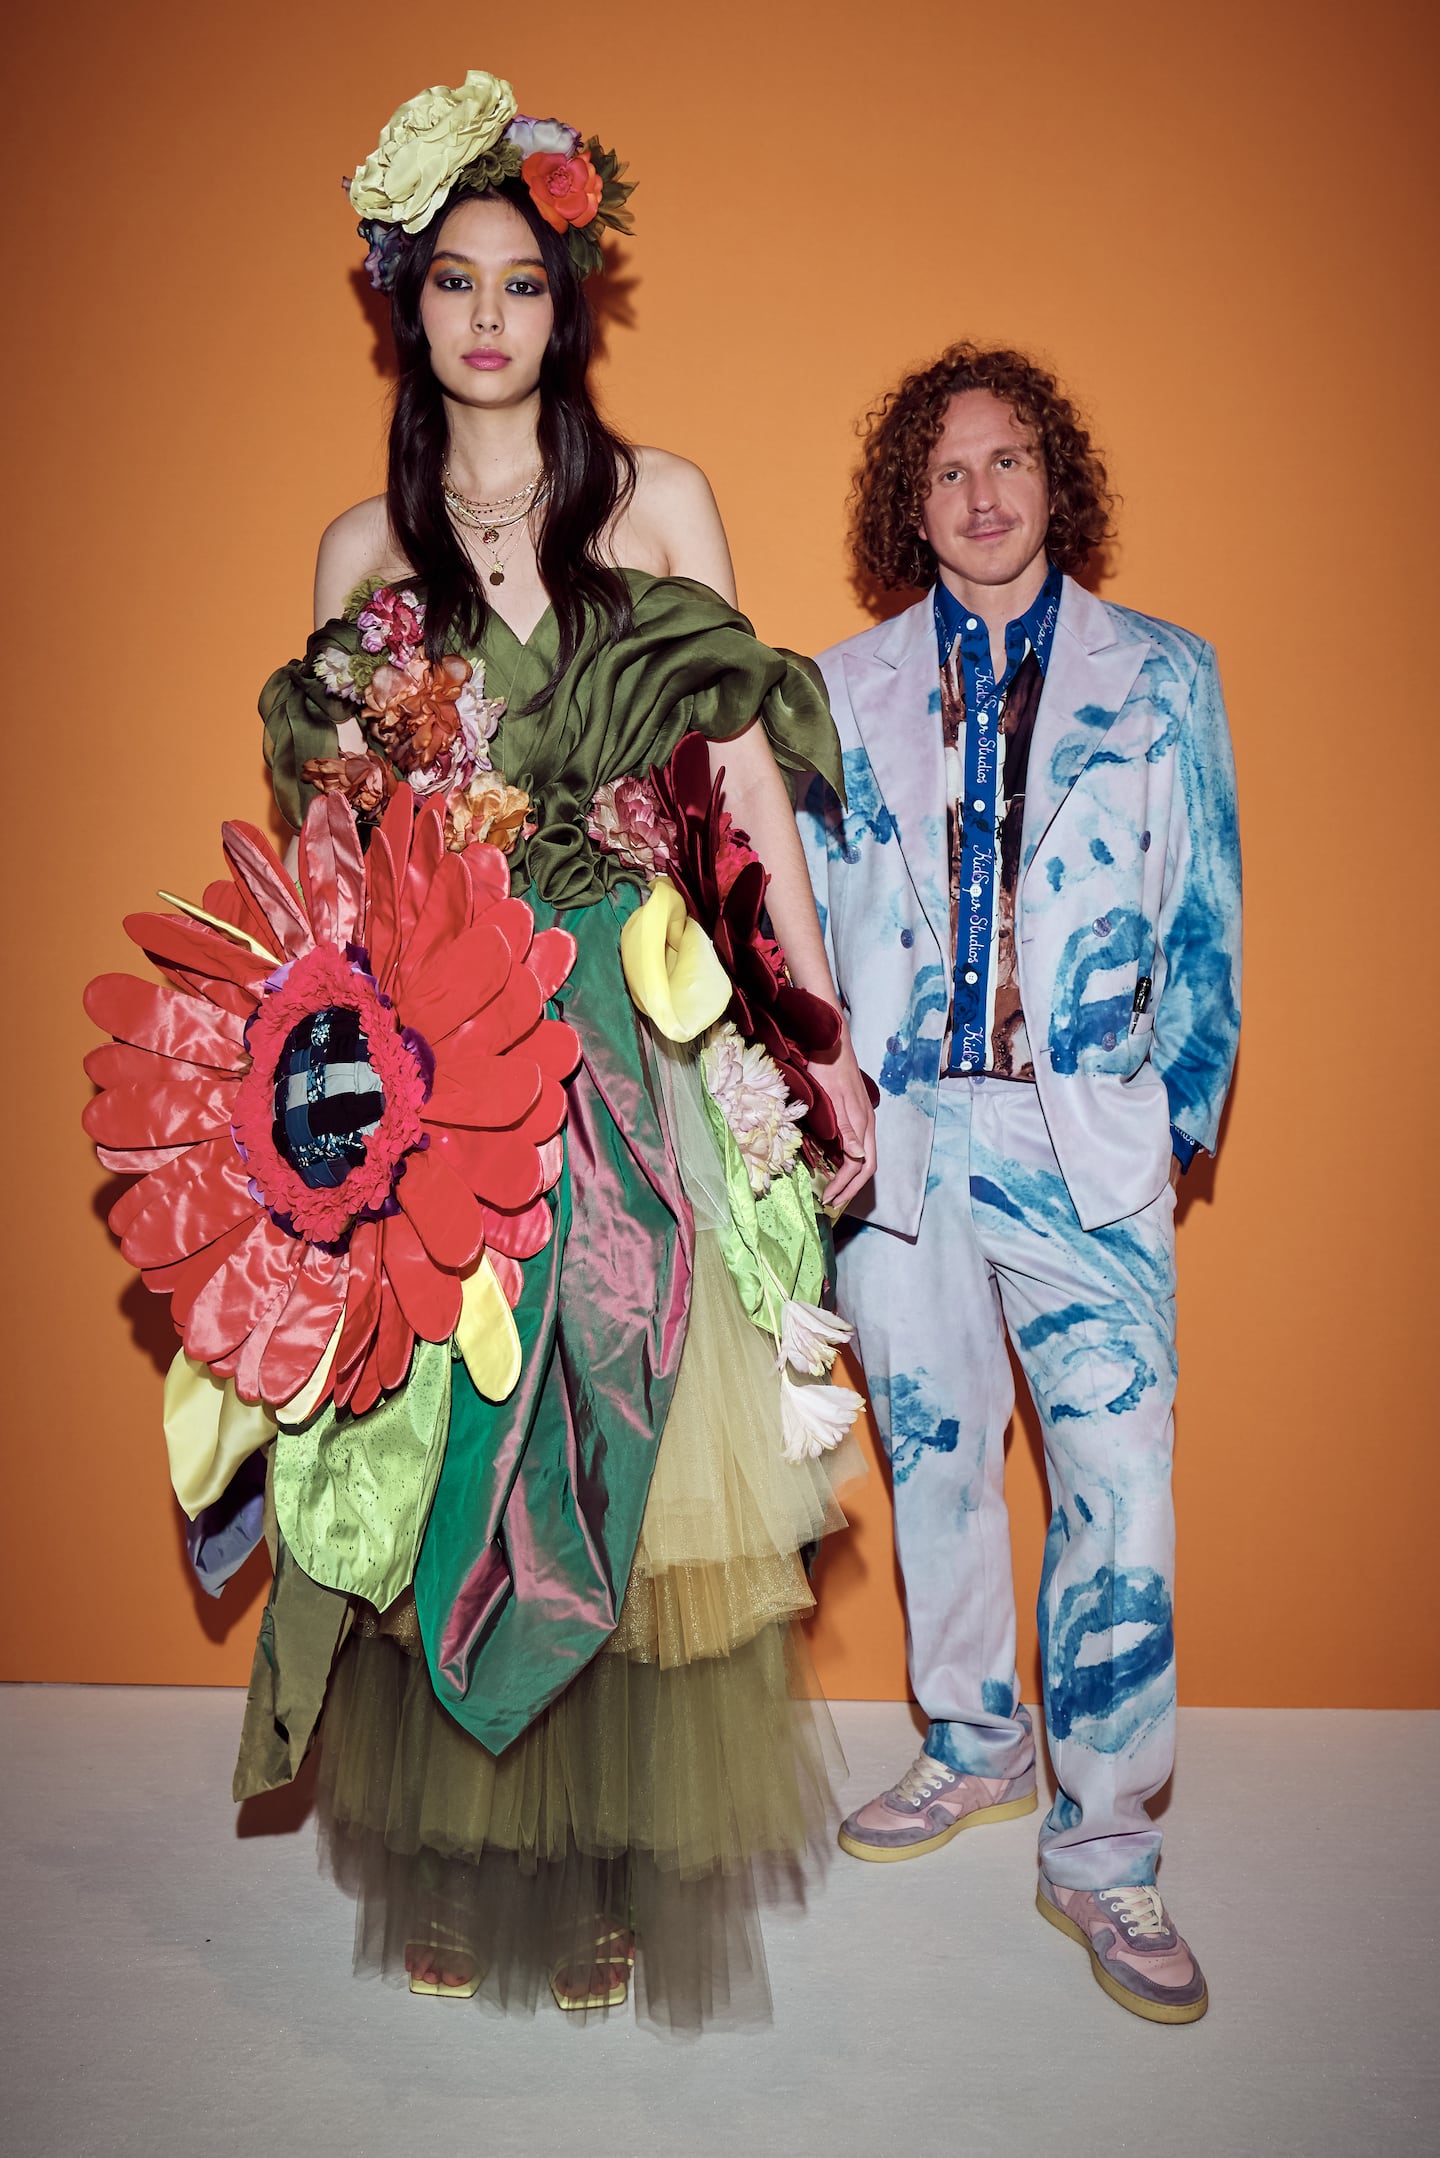 KidSuper designer Colm Dillane poses with a model at the LVMH Prize ceremony in 2021.